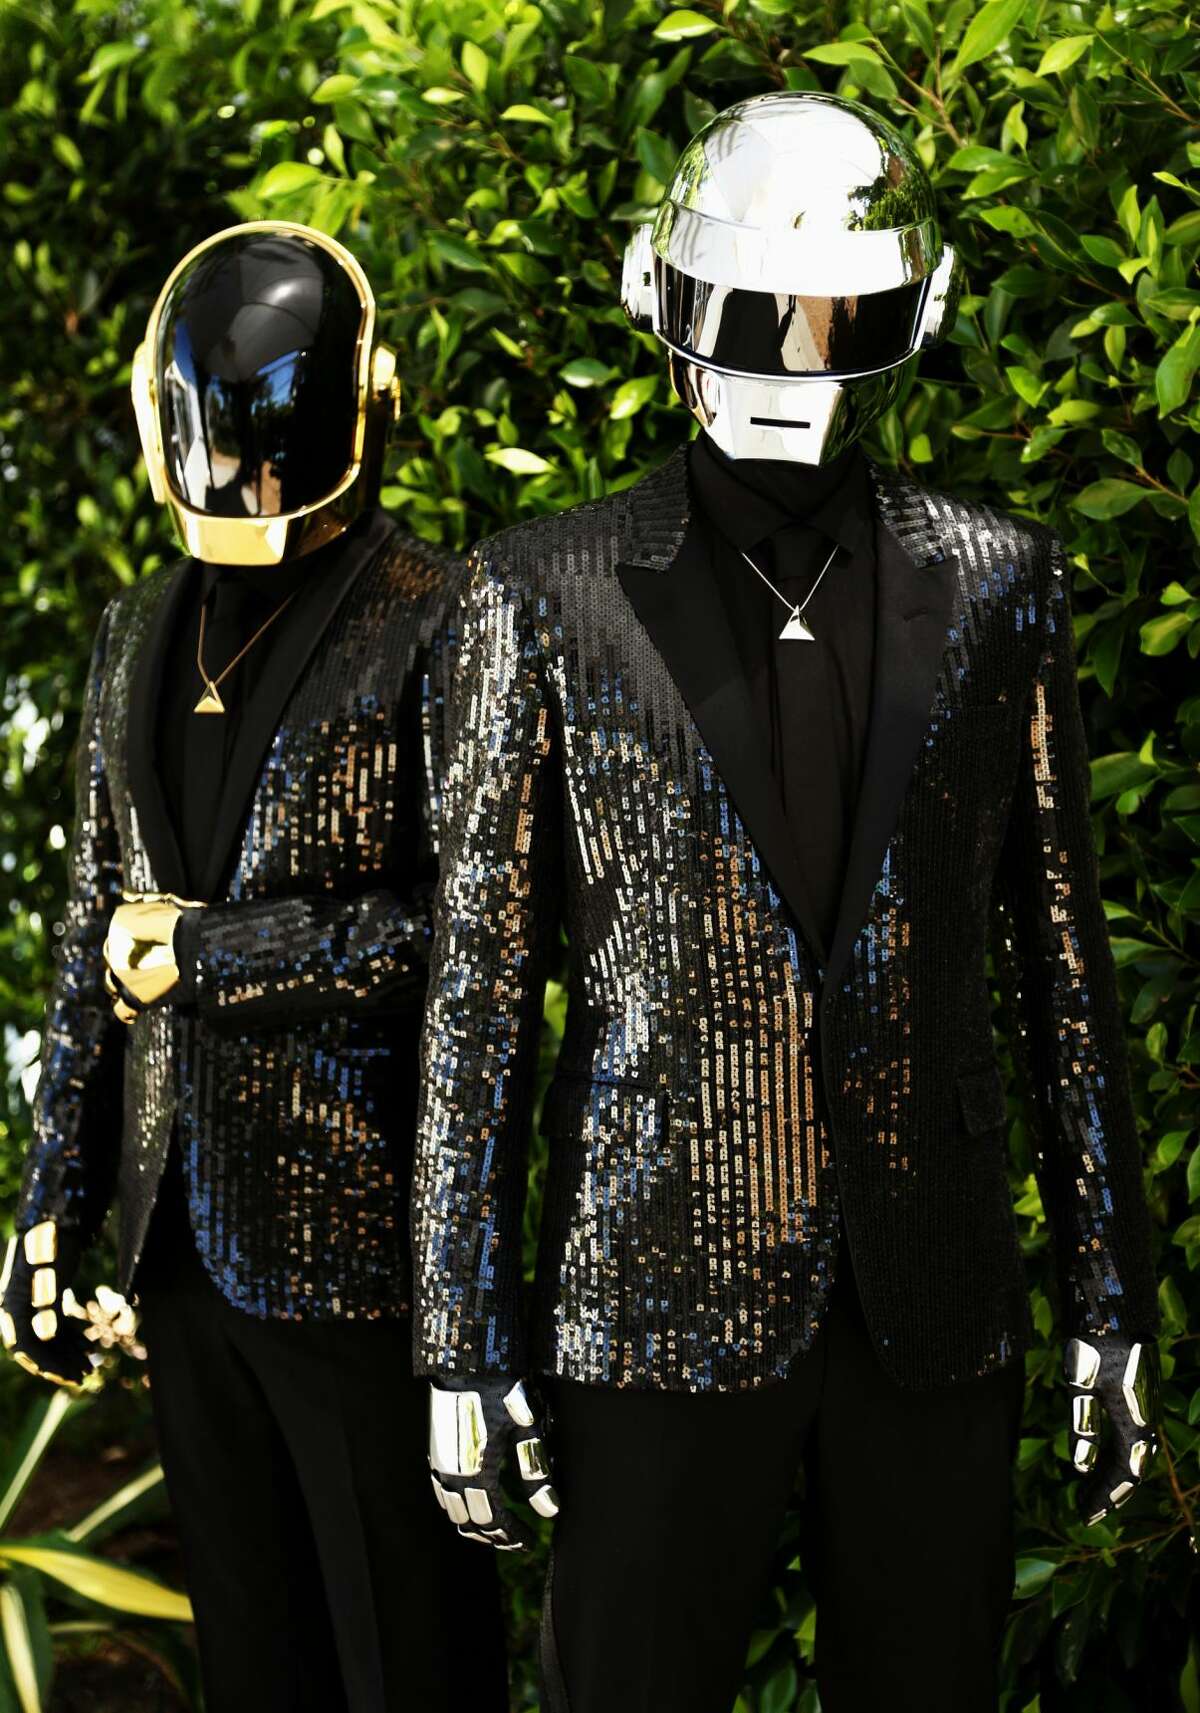 Daft Punk sets Spotify record with new album